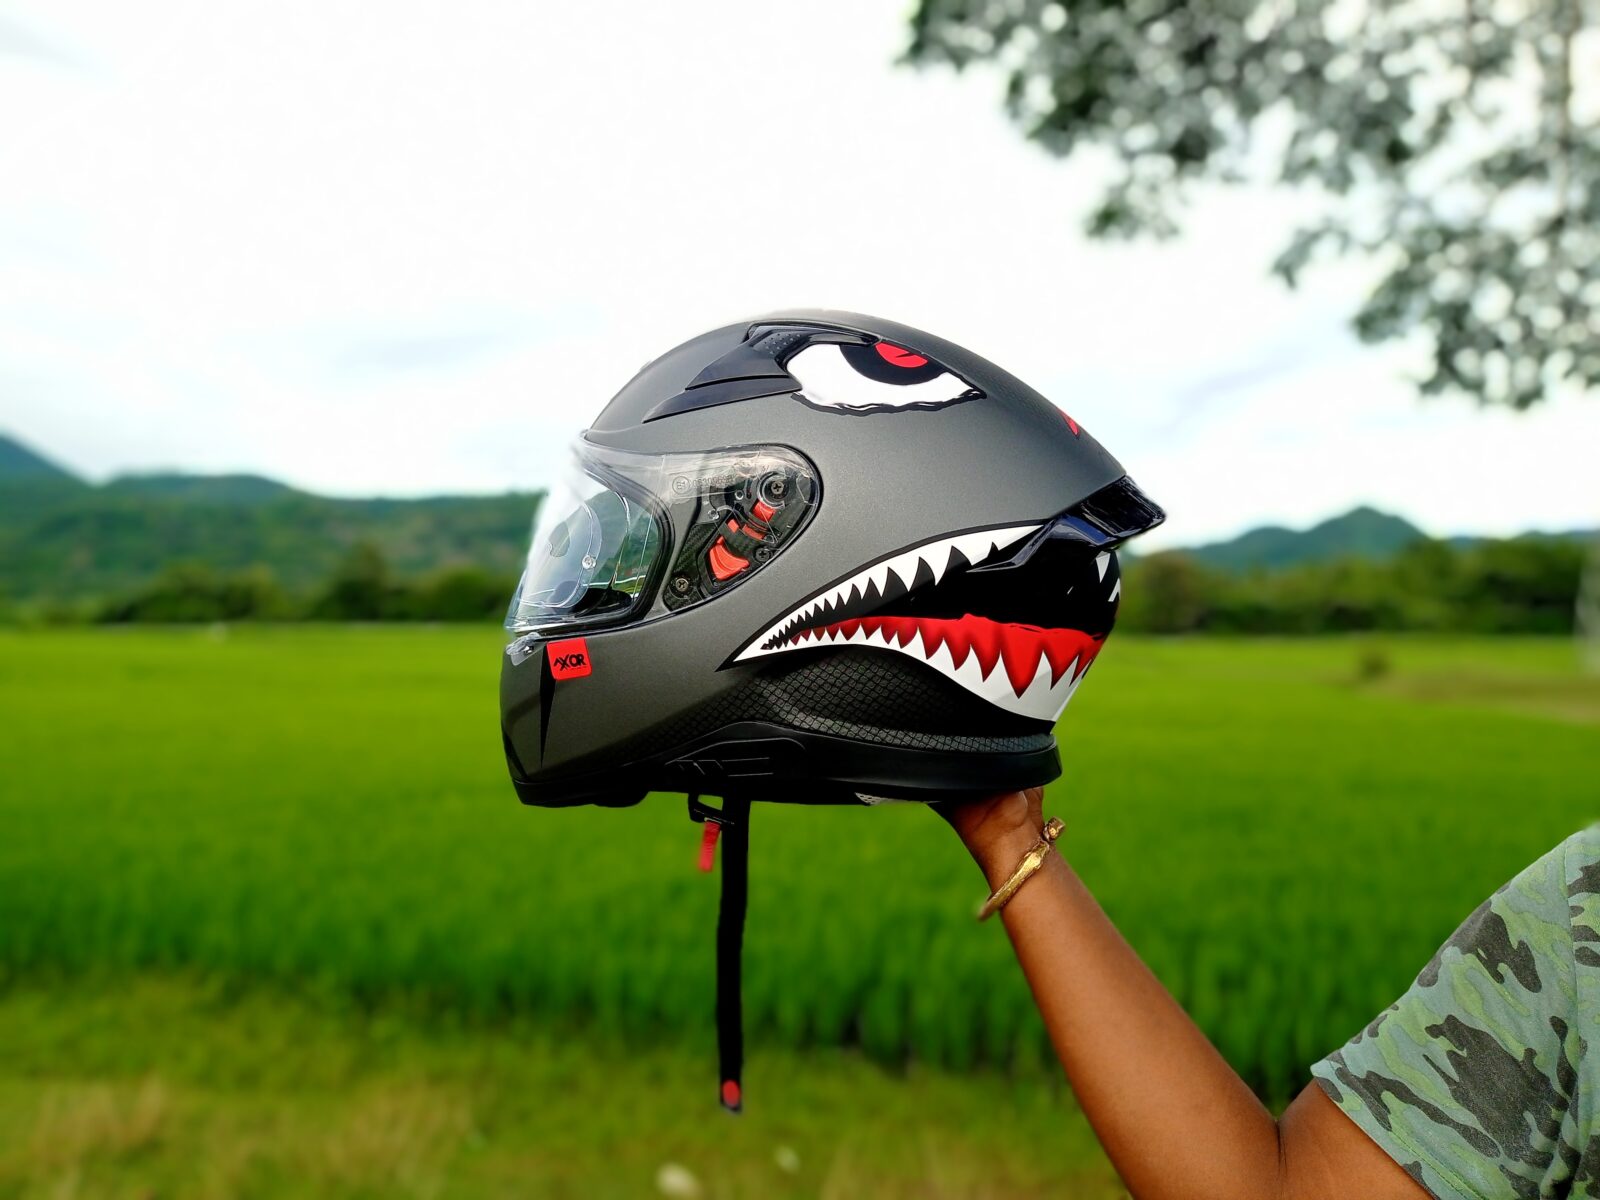 Axor Helmets | Why Most of Indian Riders Use Axor Helmets?